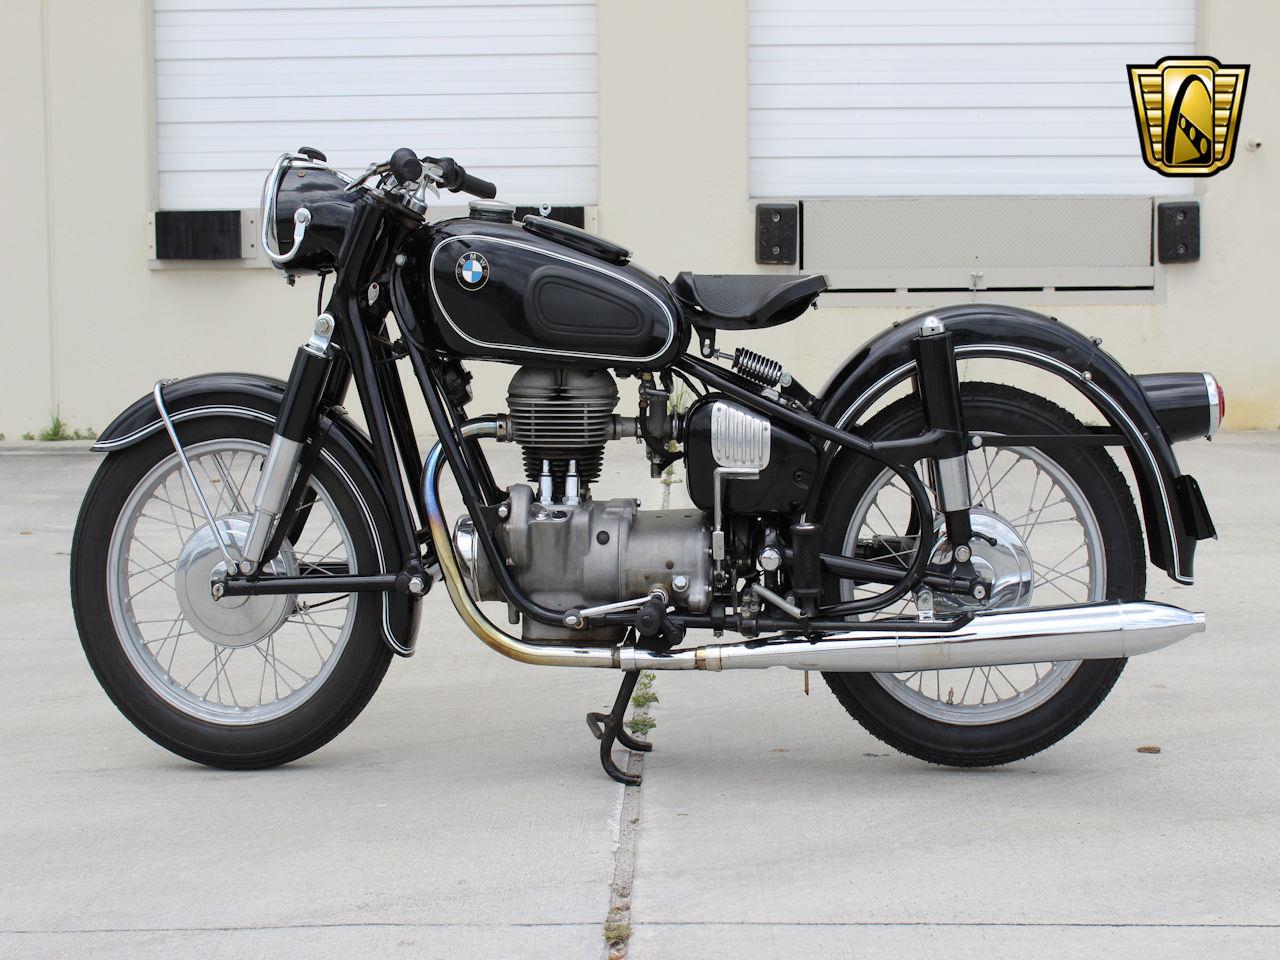 10 1959 bmw motorcycle for sale Pics